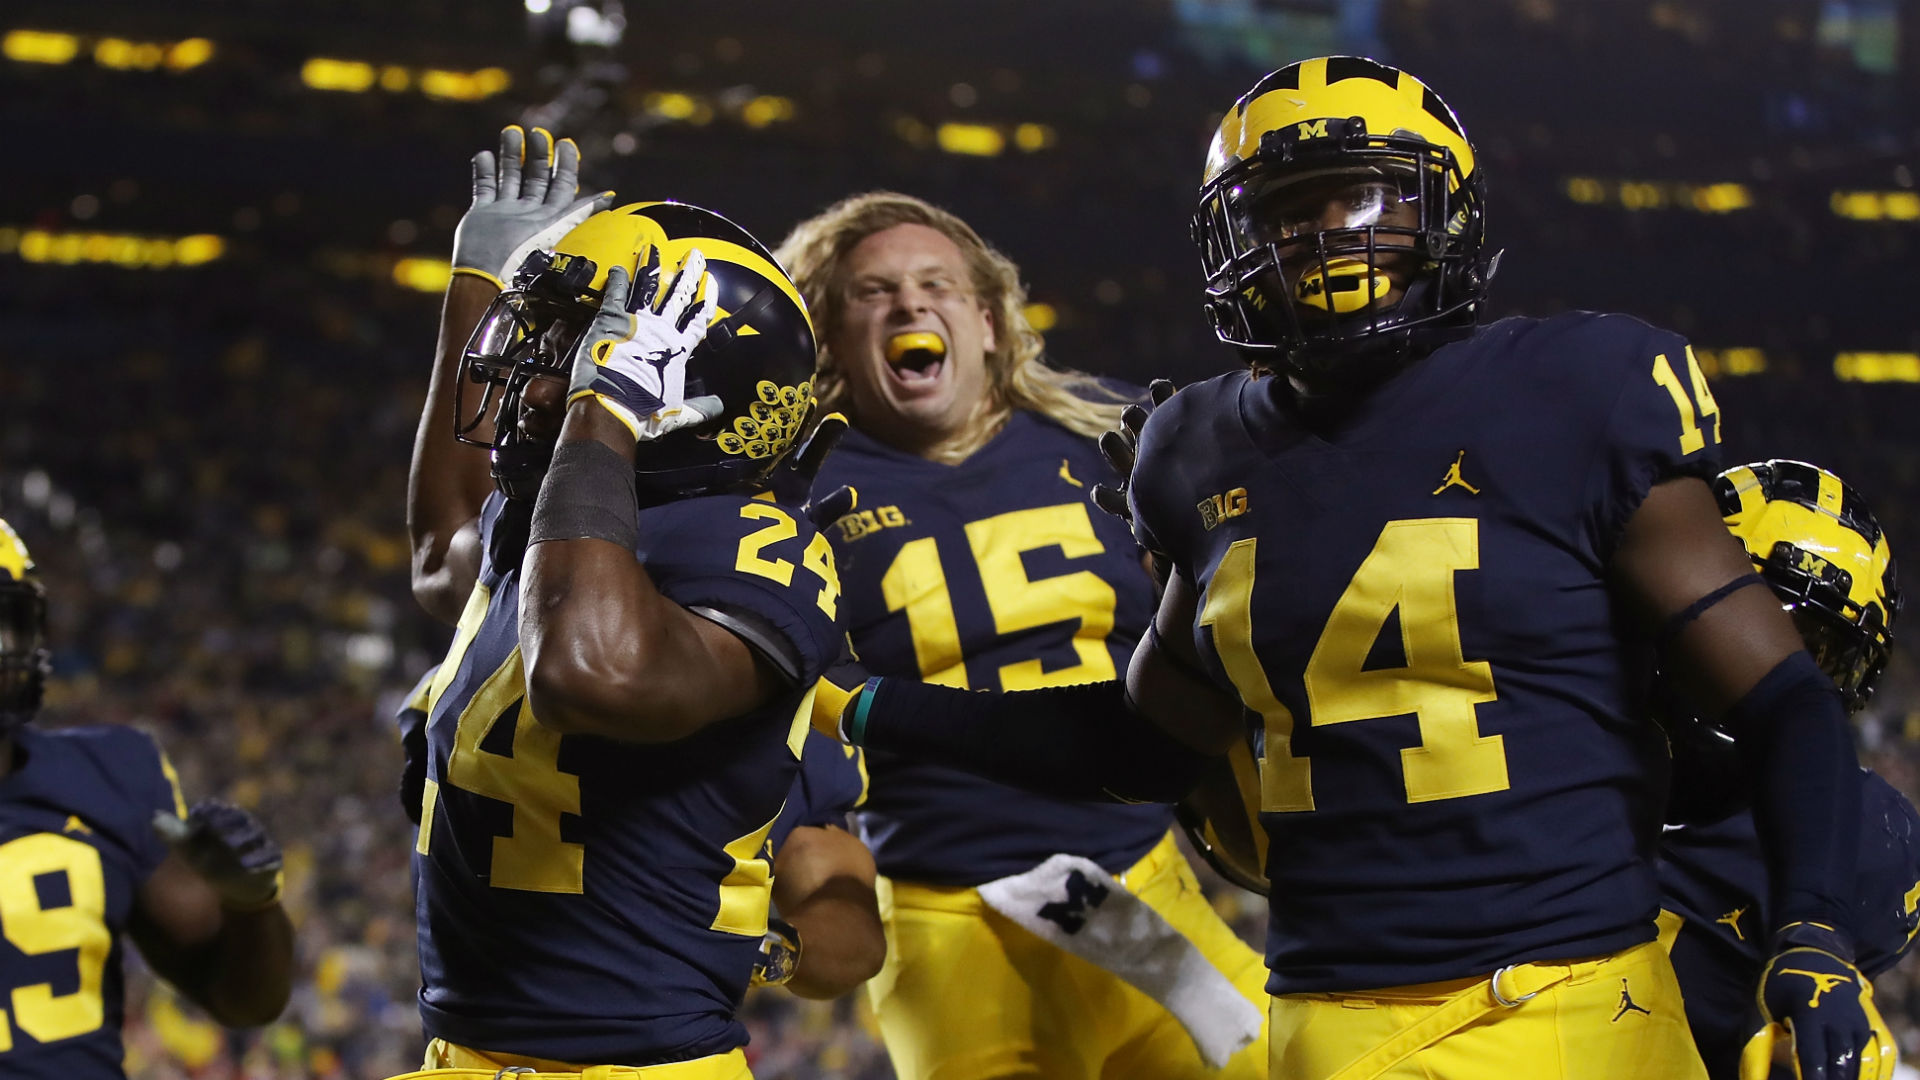 Michigan vs. Wisconsin Wolverines win big in The Big House Sporting News